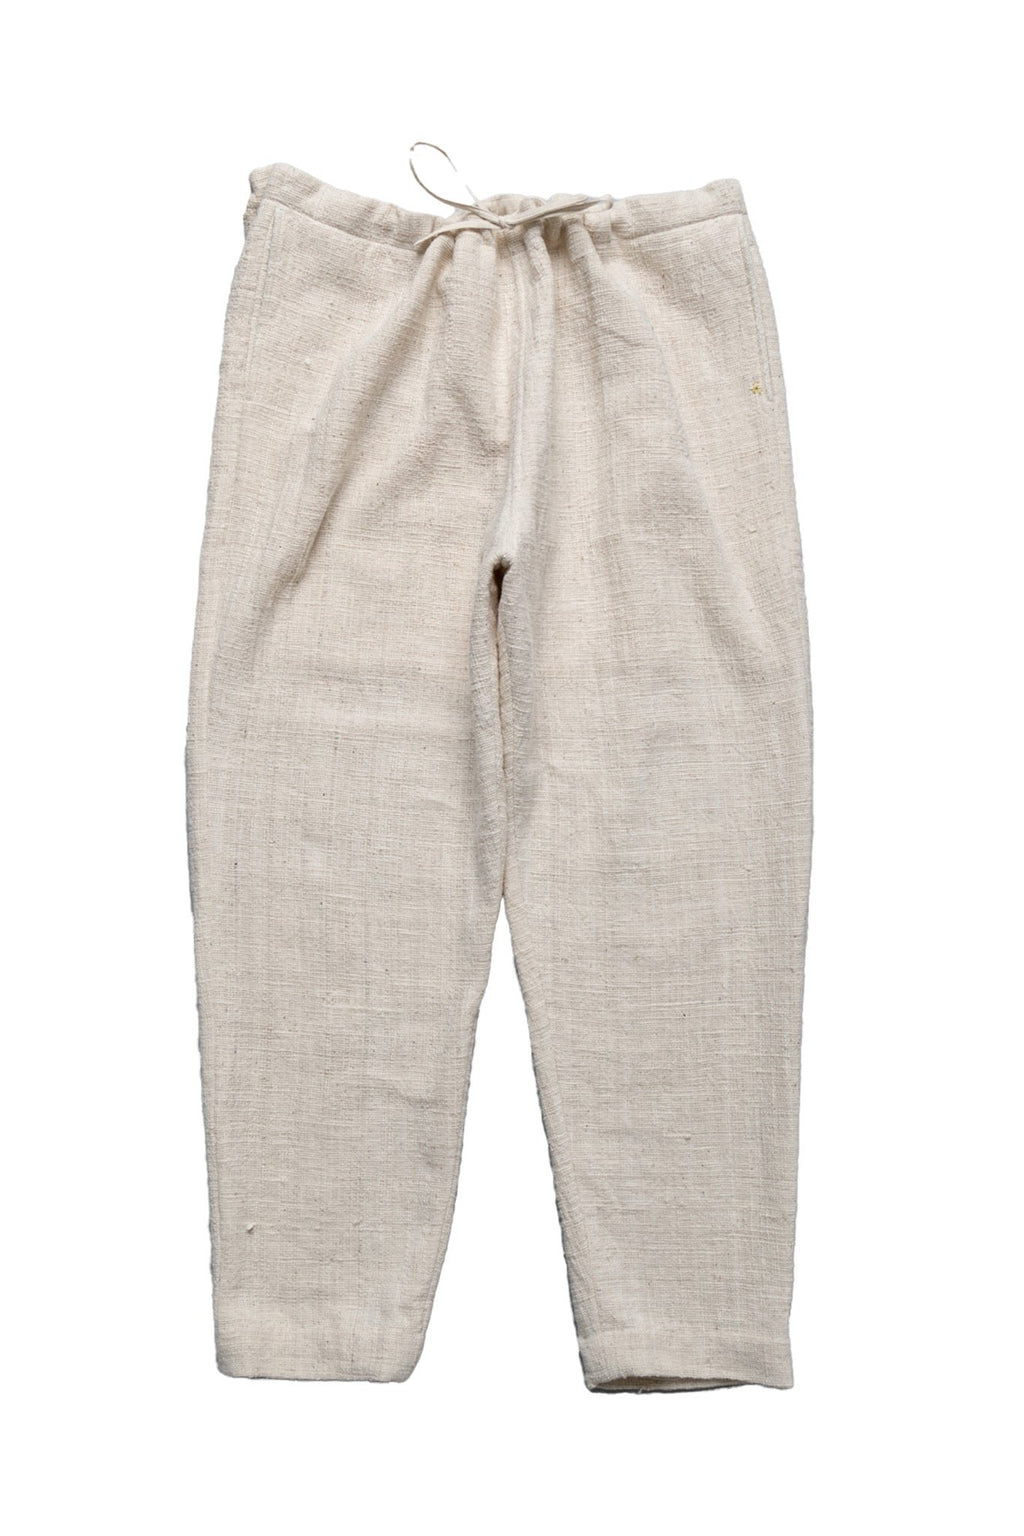 String Pants in Ecru, from Eleven Eleven – Clic